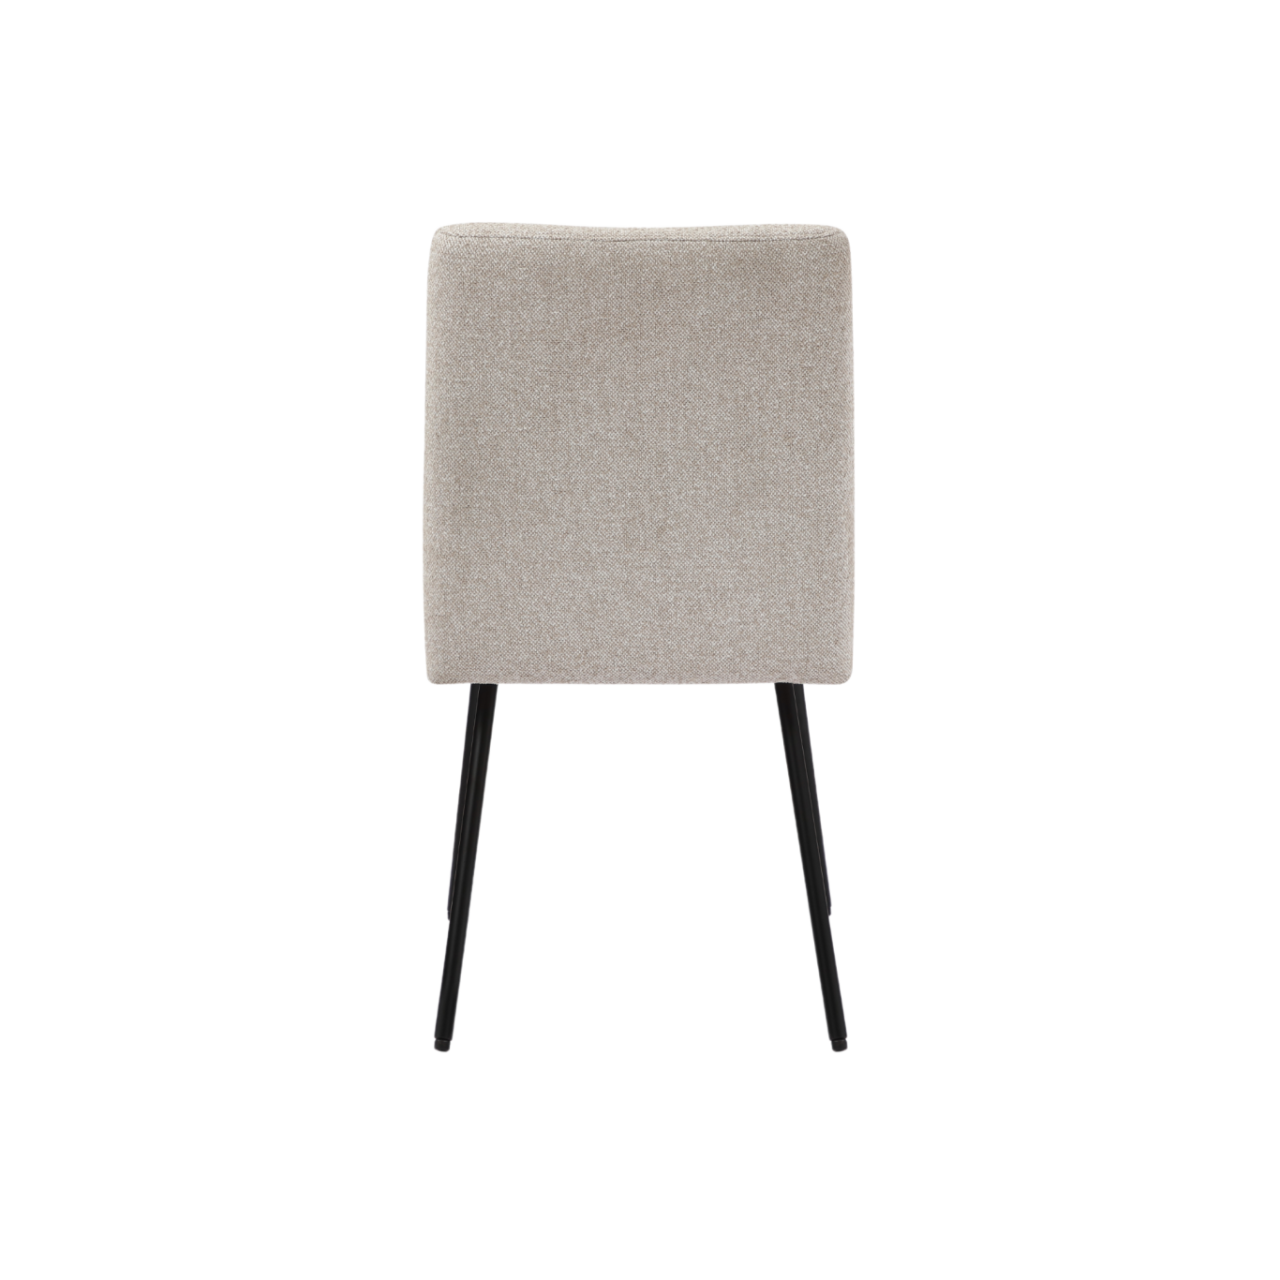 back view of comfortable, fully upholstered minimal dining chair in mink flat weave fabric